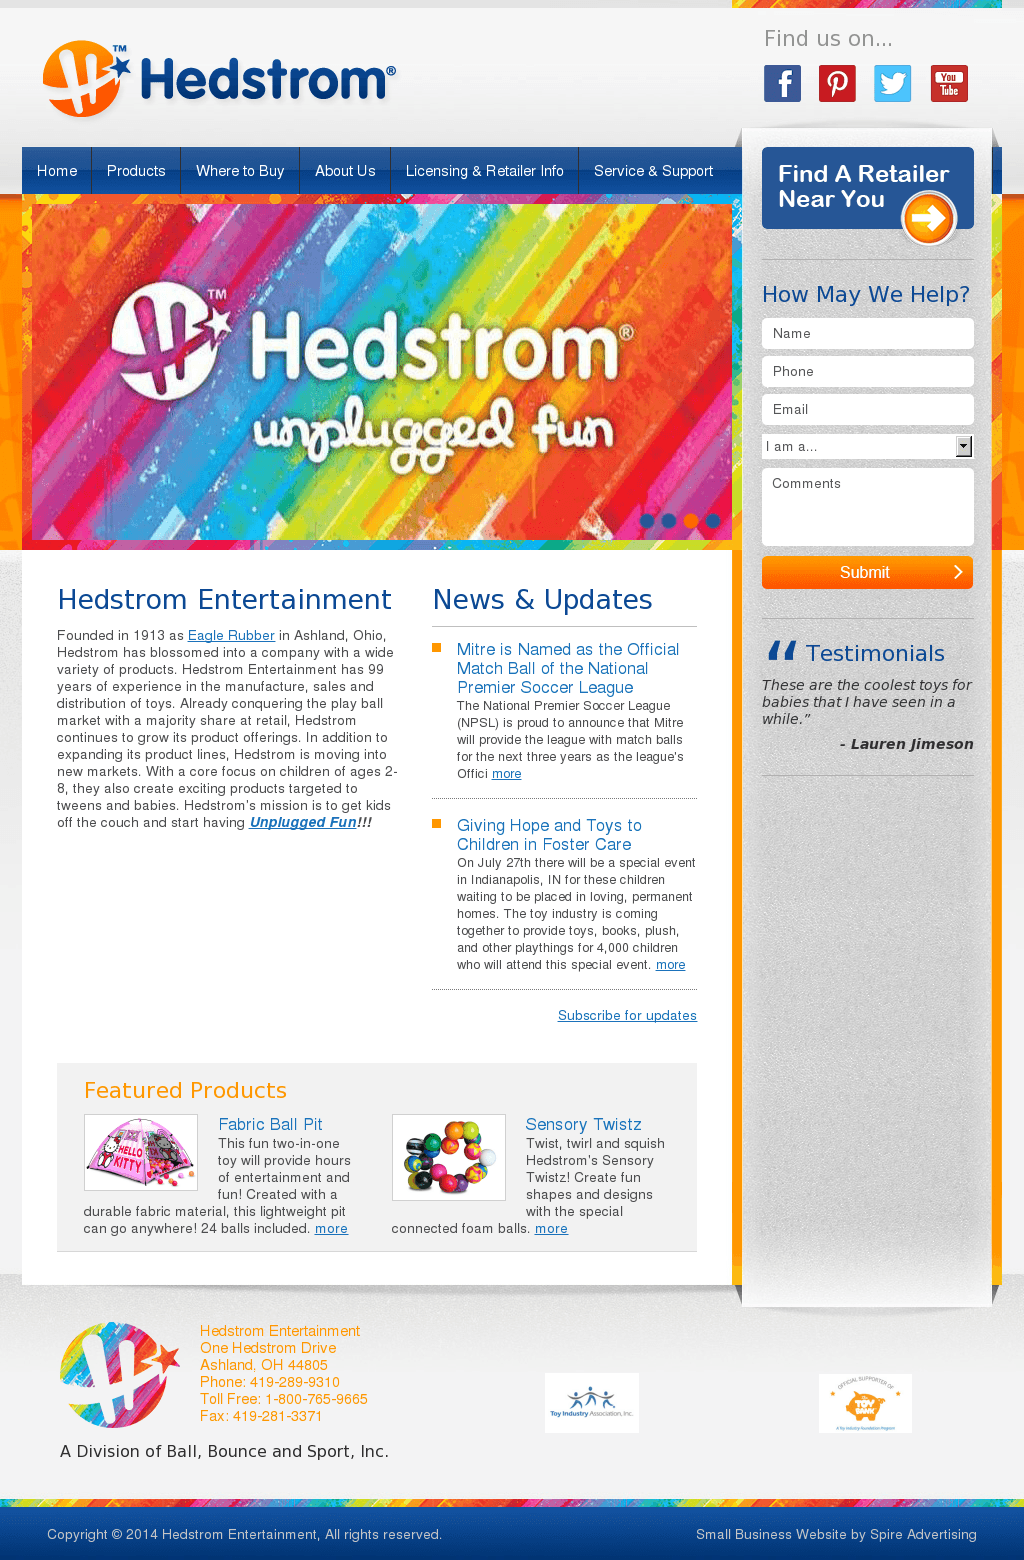 Hedstrom Logo - Hedstrom Competitors, Revenue and Employees - Owler Company Profile